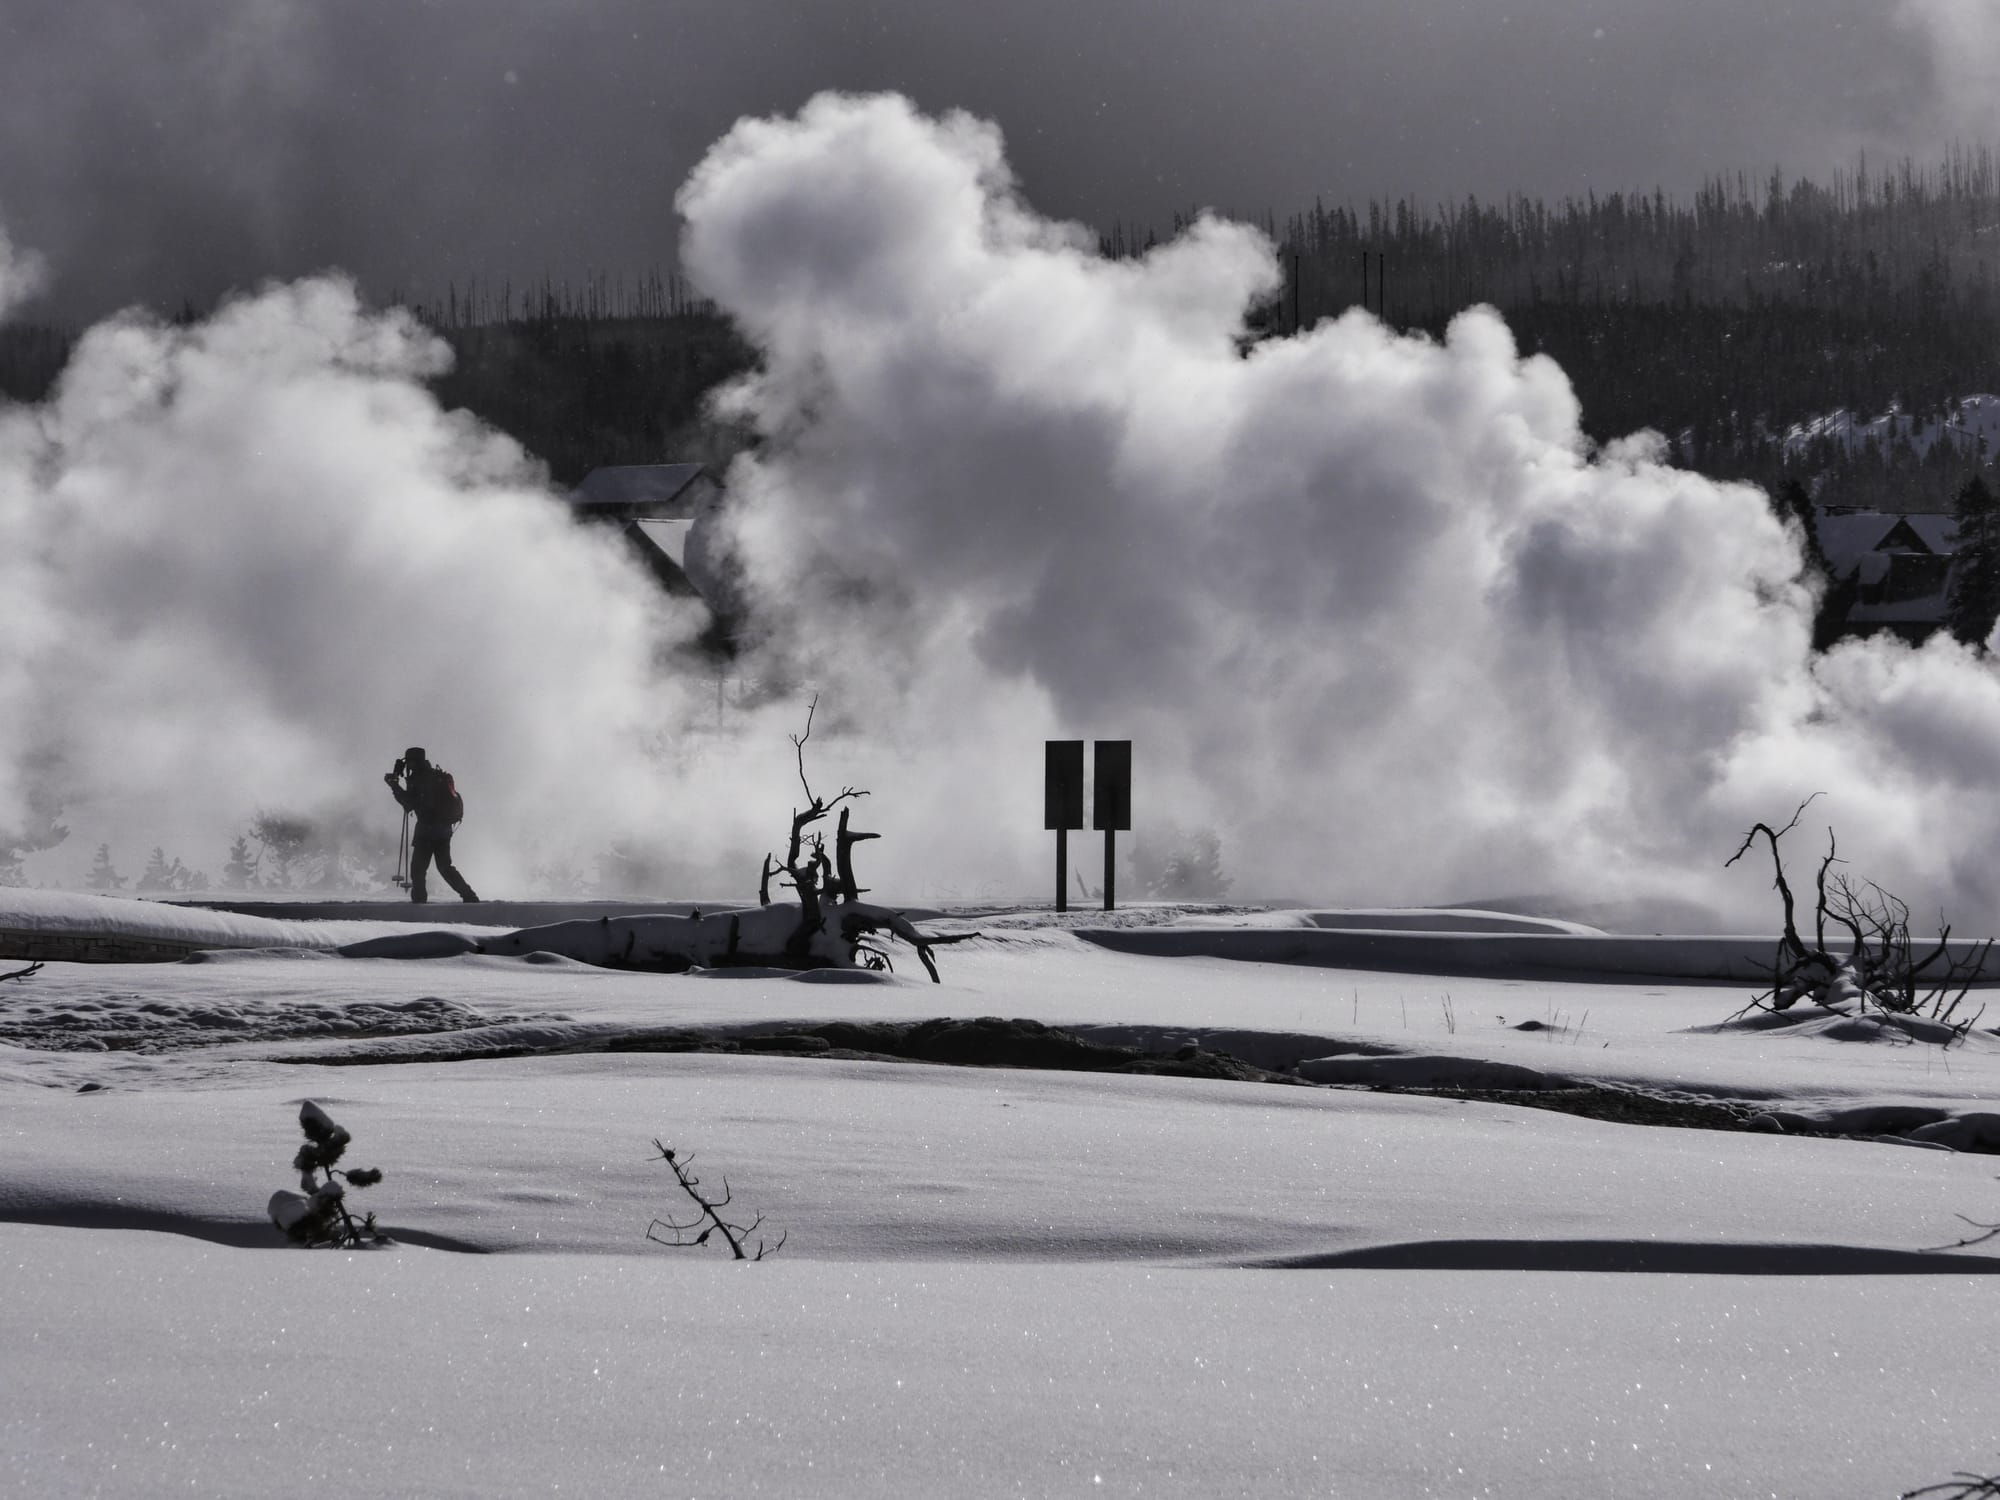 Photo by Author — snowshoe tour of the Upper Geyser Basin